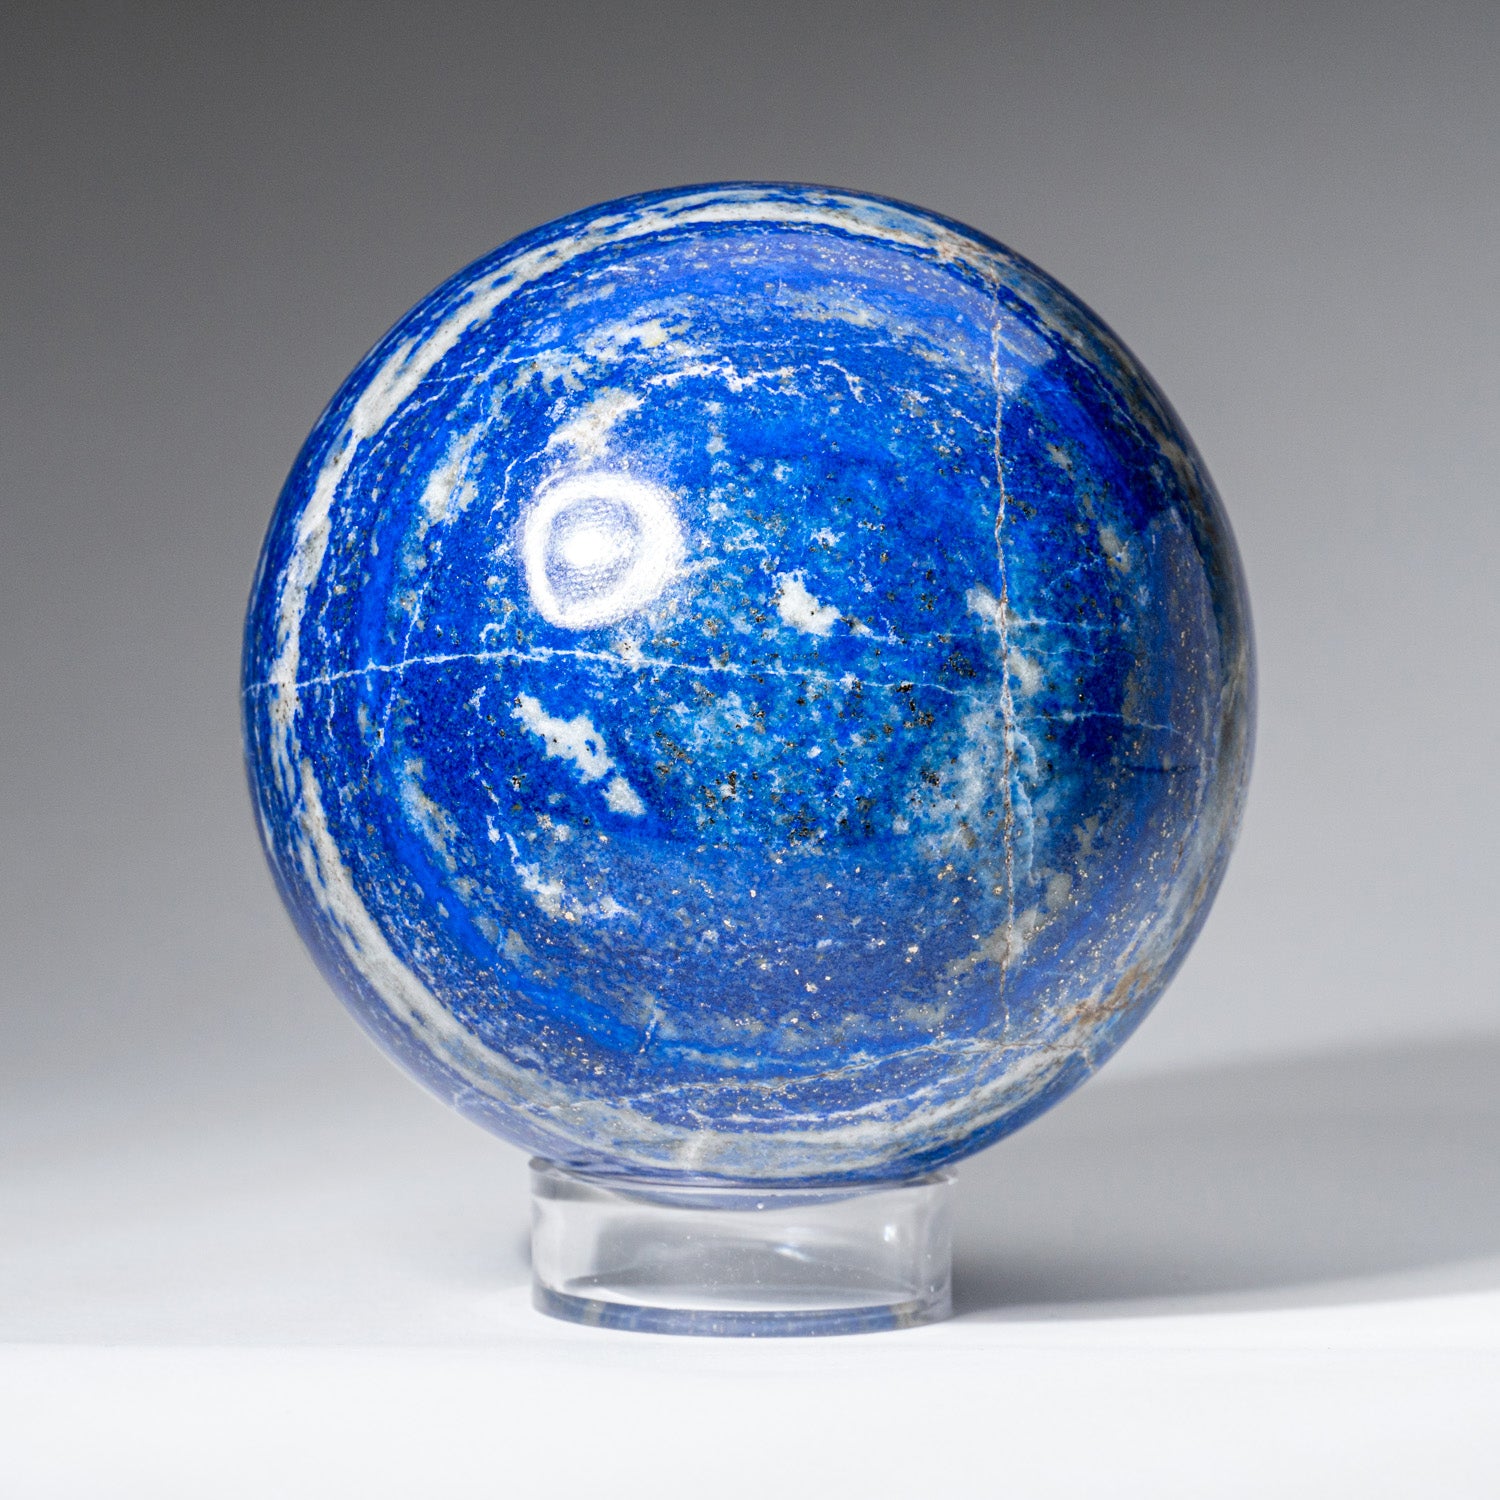 Polished Lapis Lazuli Sphere from Afghanistan (4", 4 lbs)